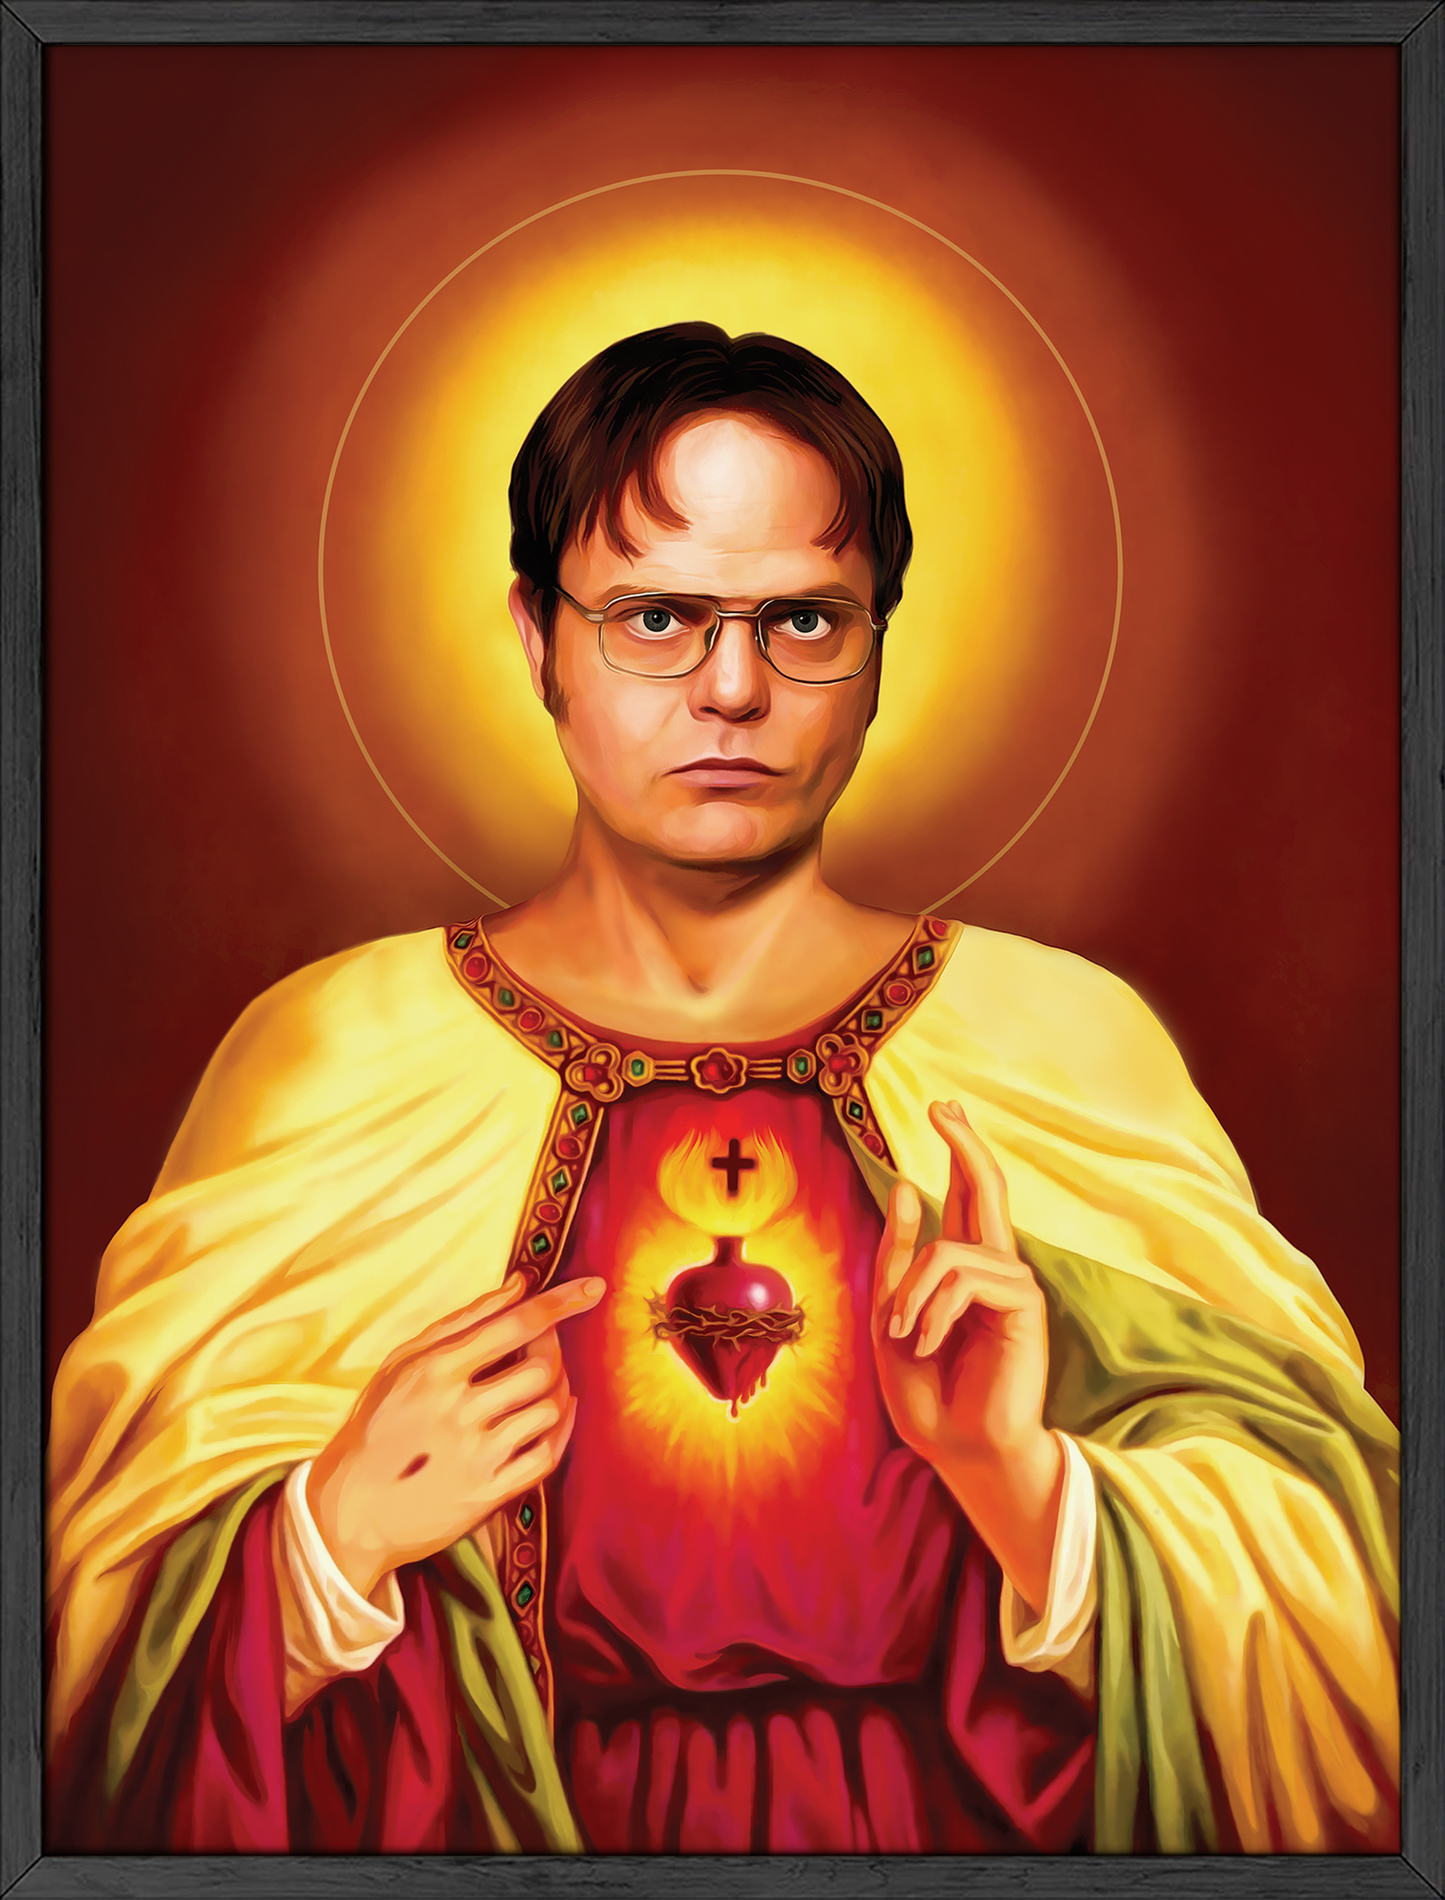 dwight schrute the office